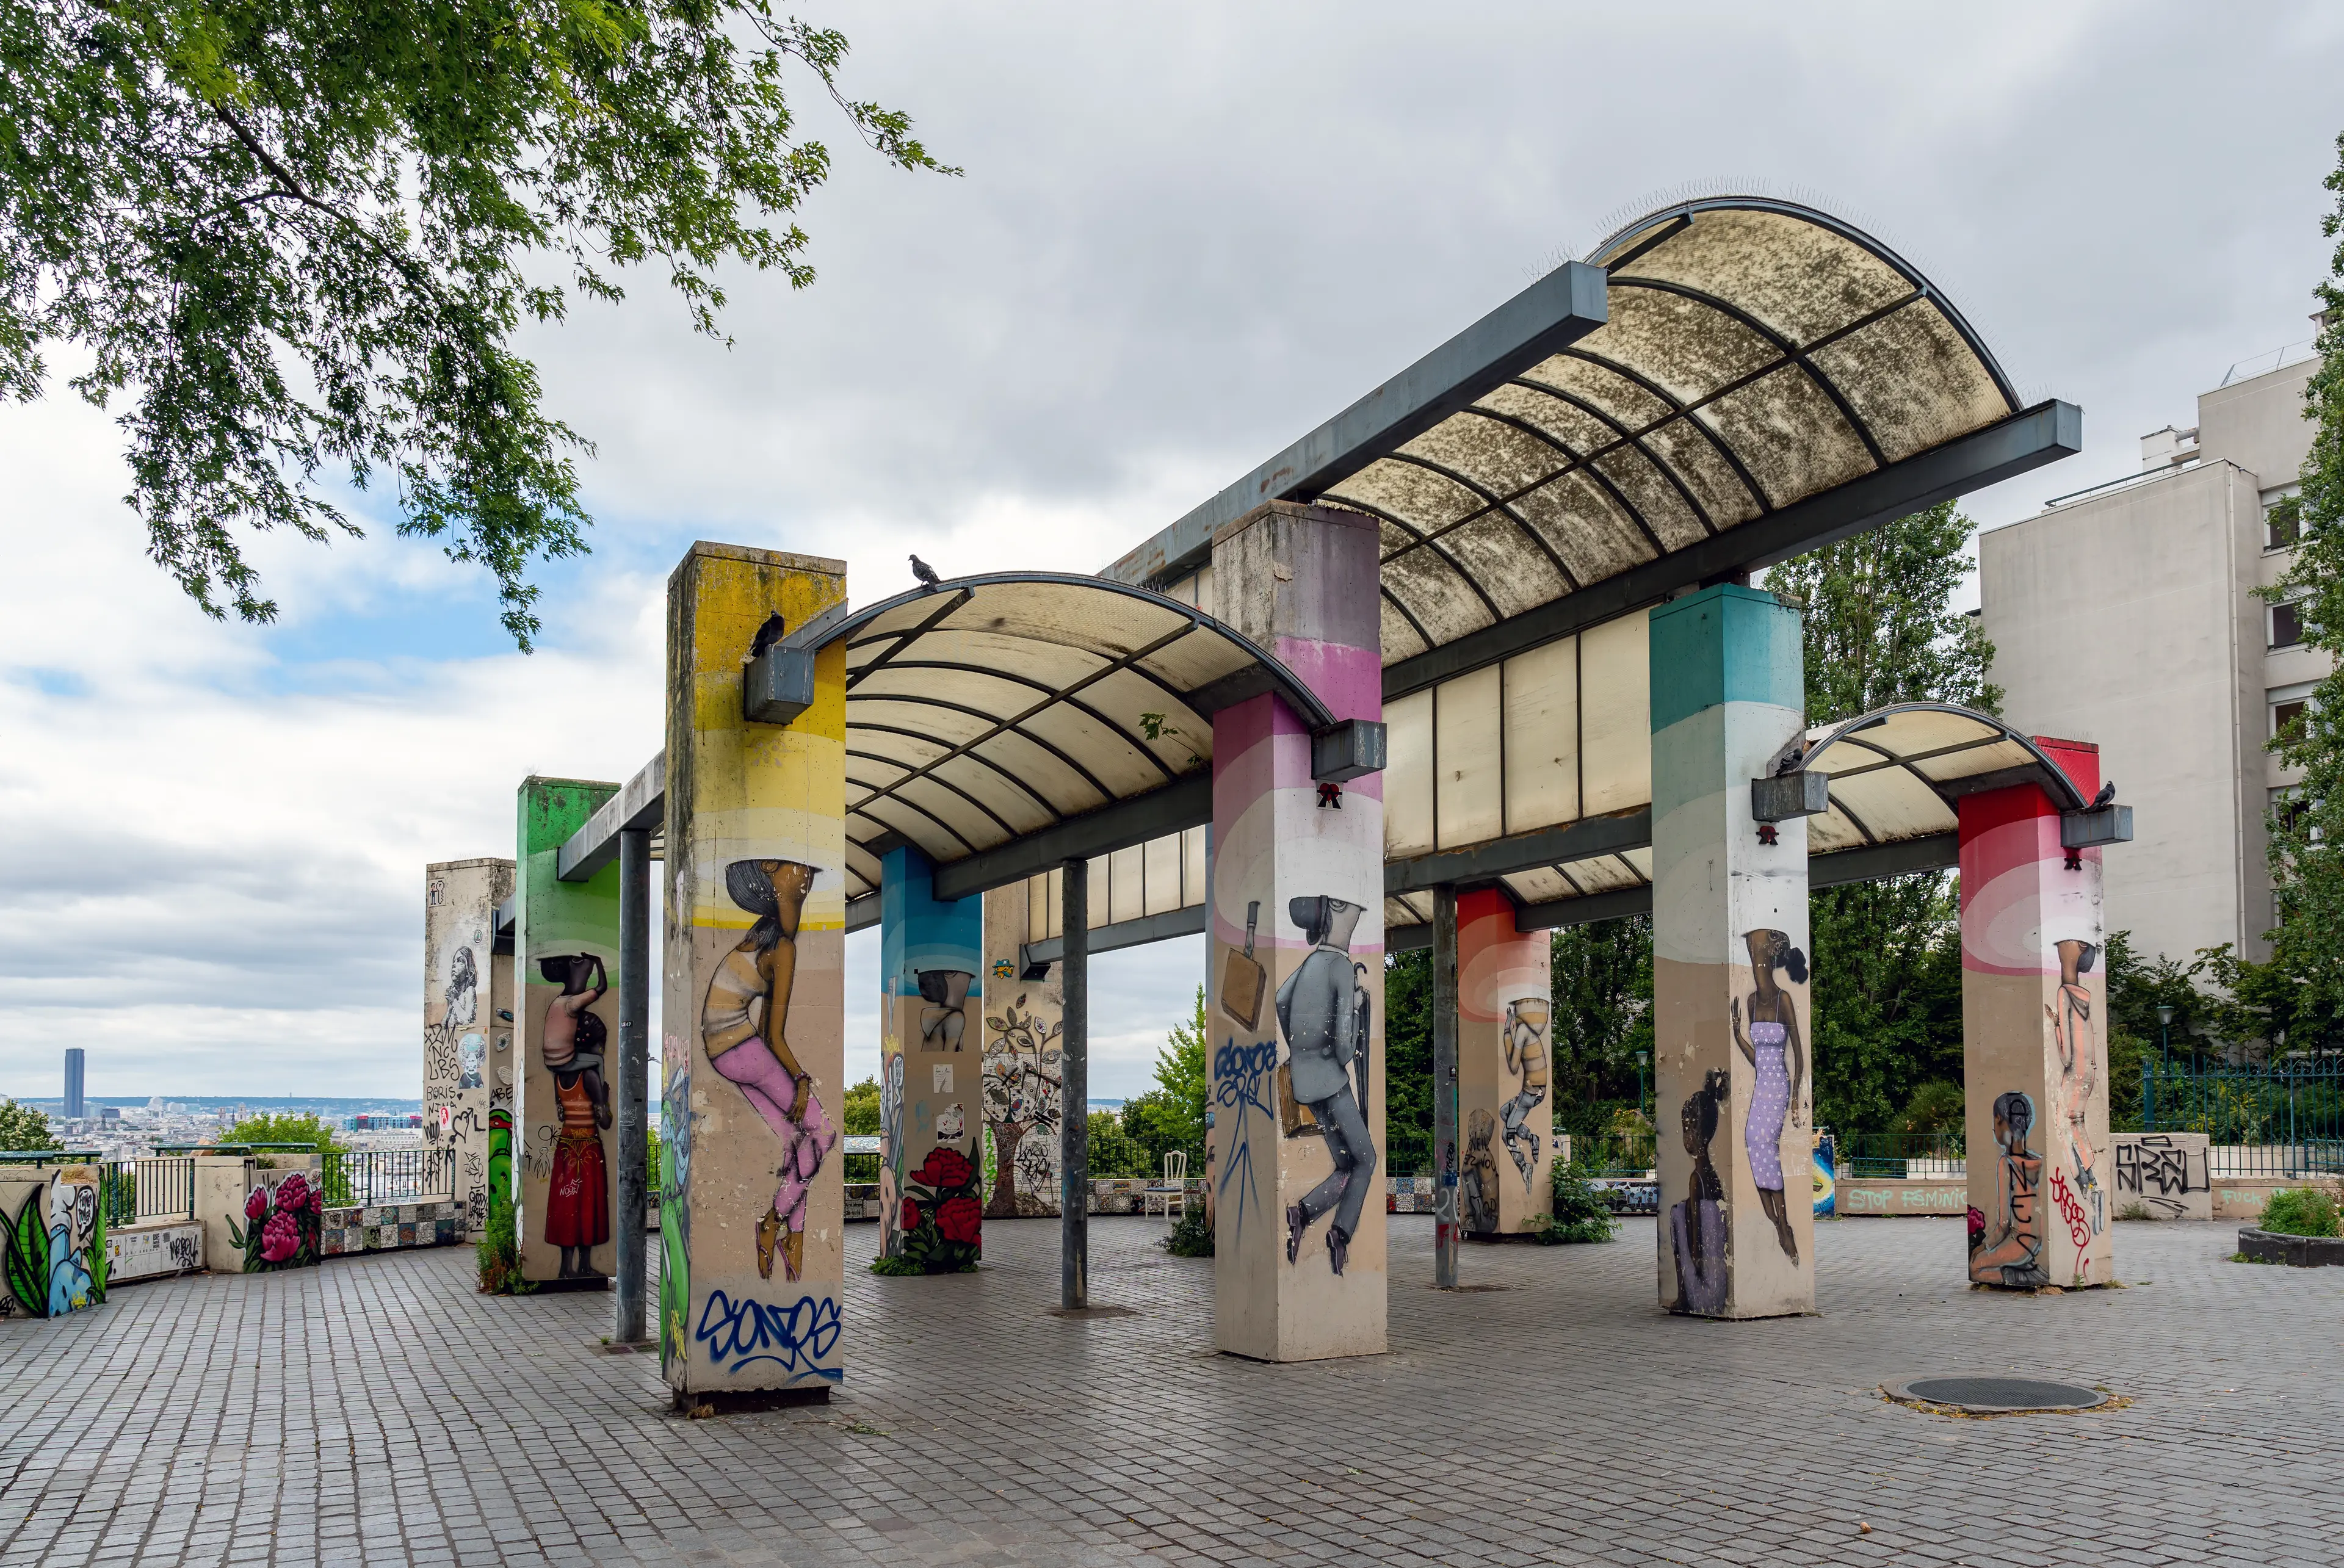 Wall mural paintings by famous French street artist Seth Globepainter (Julien Malland) at the Parc de Belleville